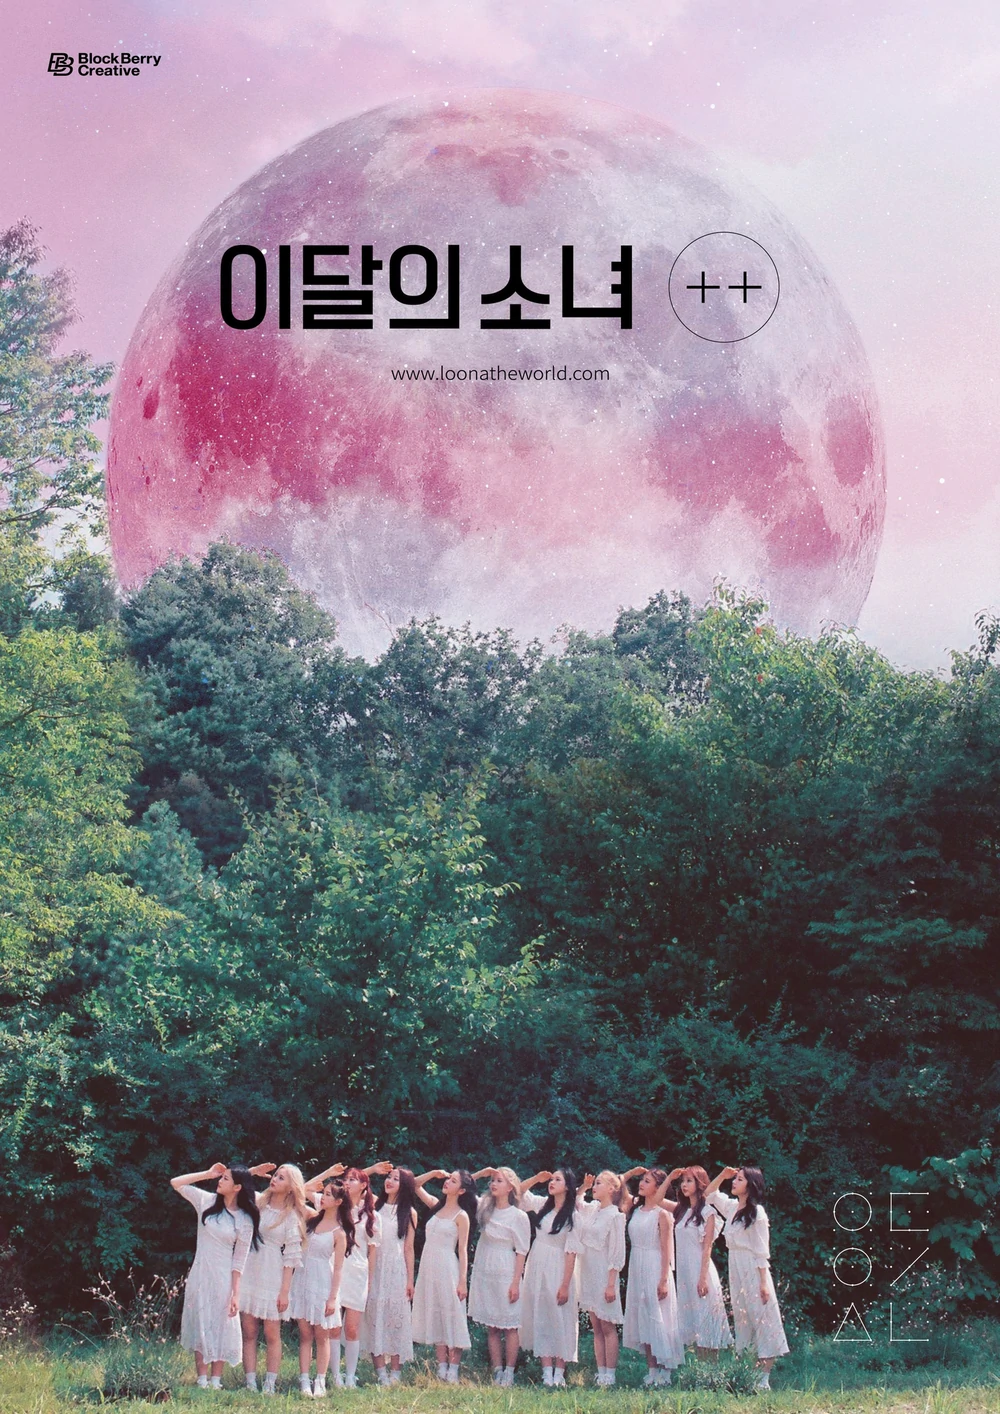 Loona ++ Group Concept Teaser Picture Image Photo Kpop K-Concept 2